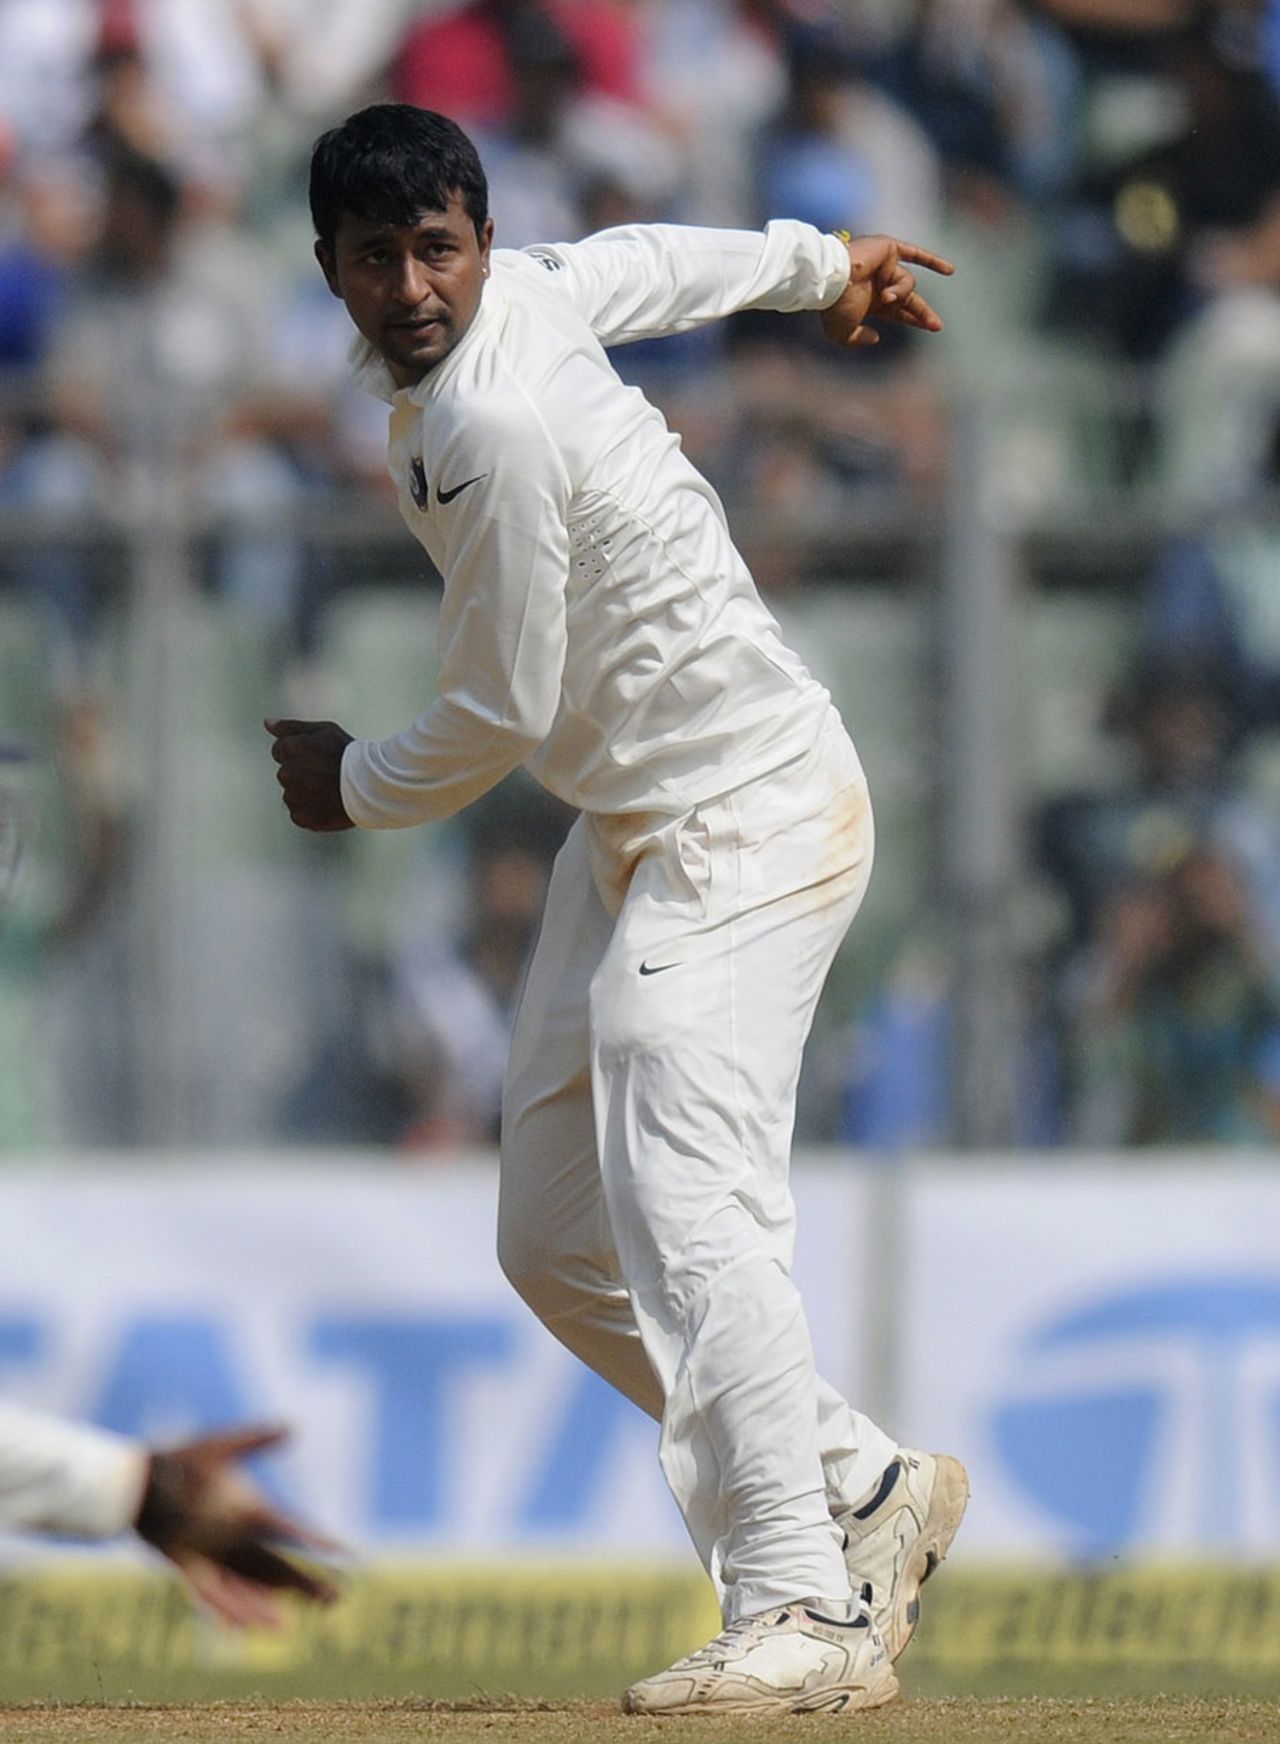 Pragyan Ojha in his delivery stride, India v West Indies, 2nd Test, Mumbai, 3rd day, November 16, 2013